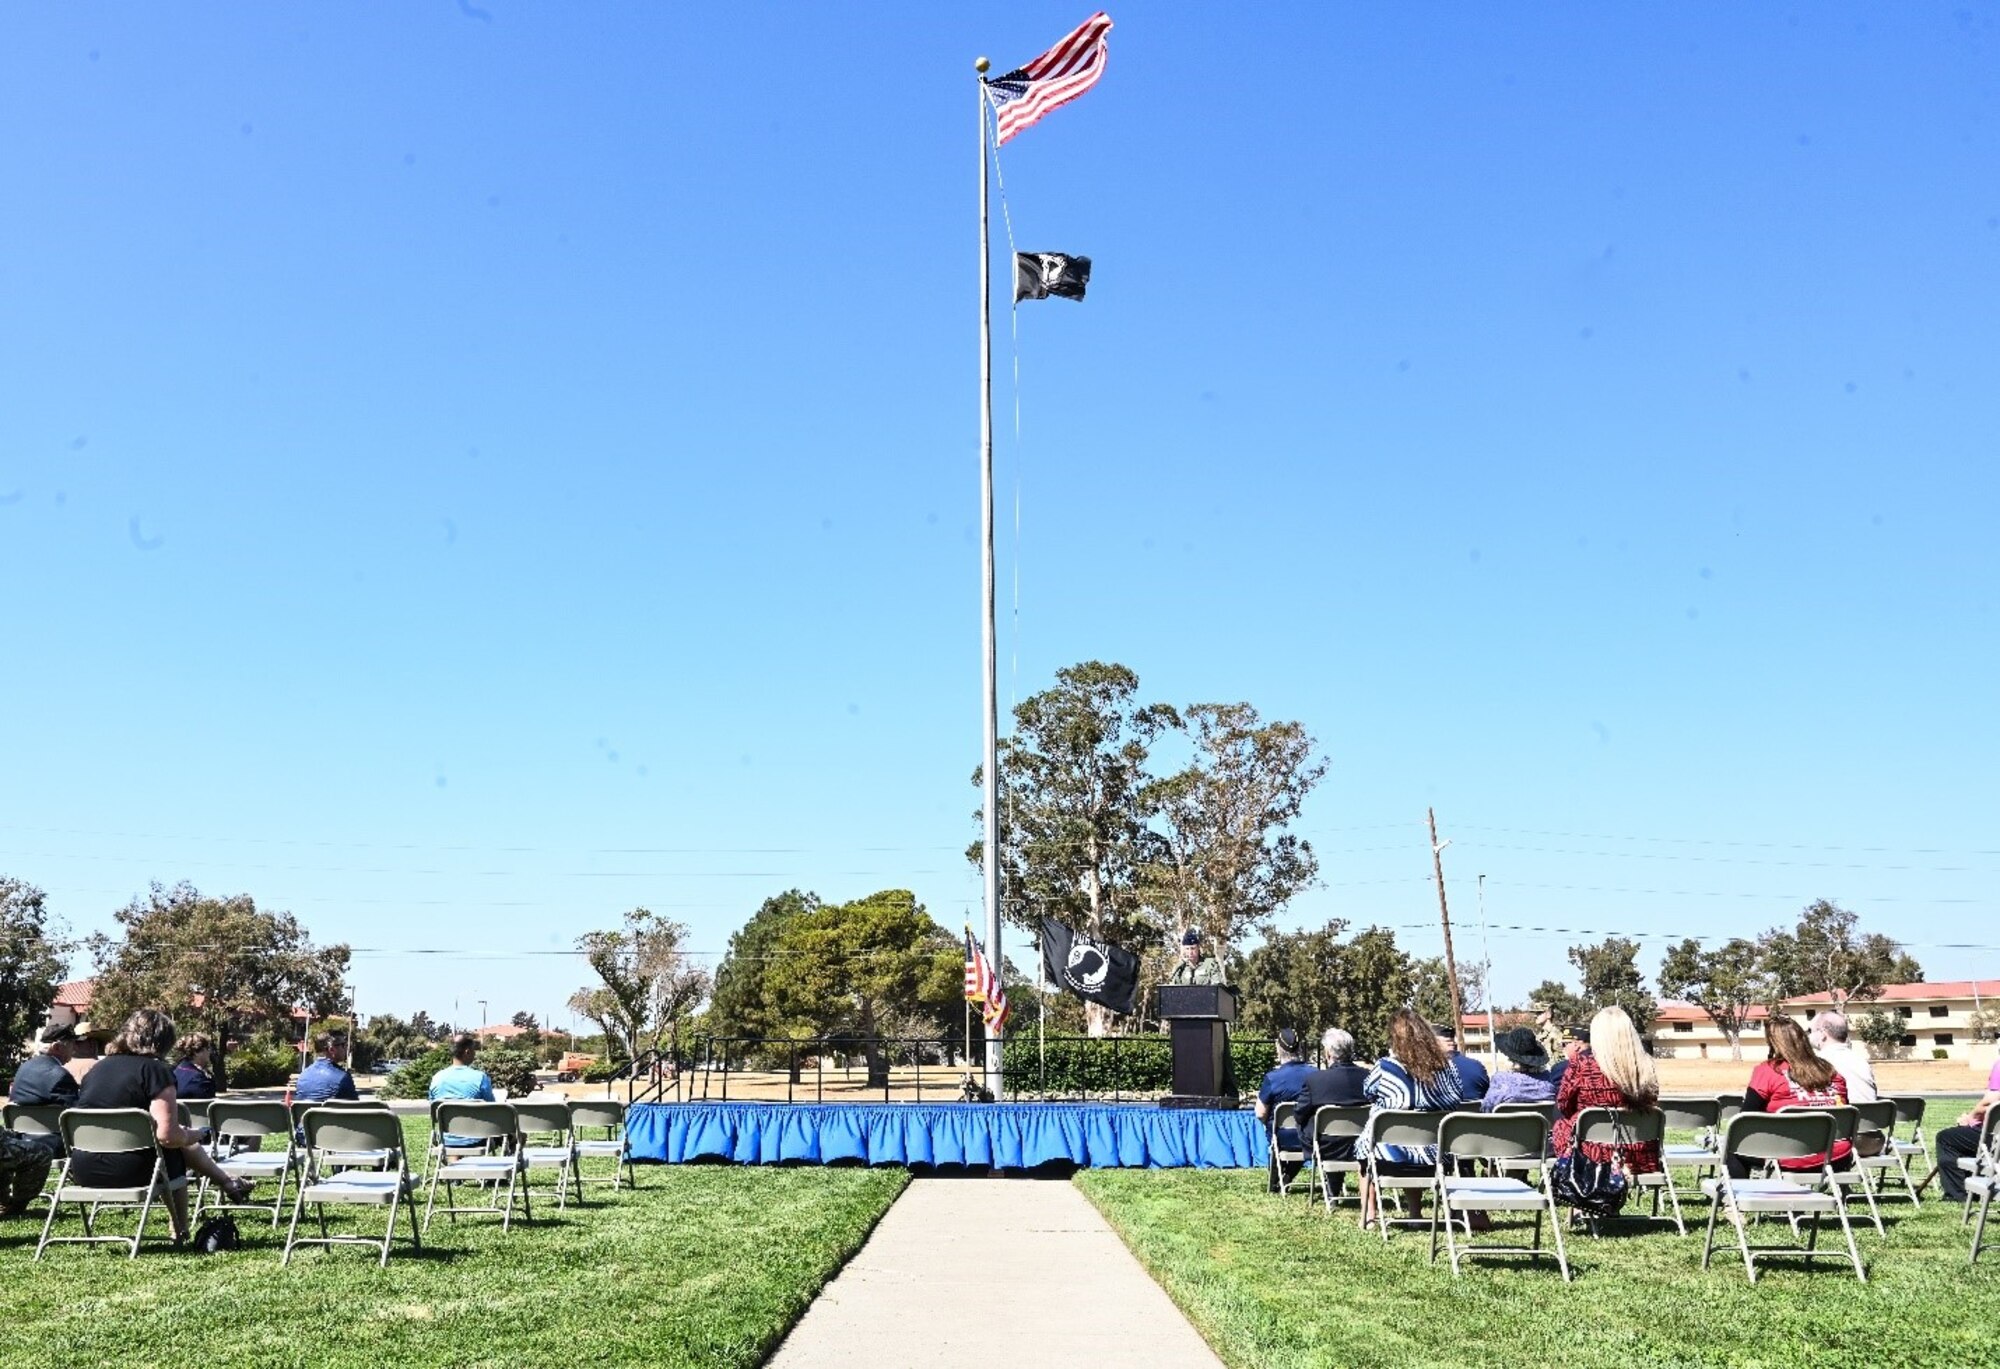 A stage is at the center of a congregation of attendees with a flag pole featured prominently on a sunny day